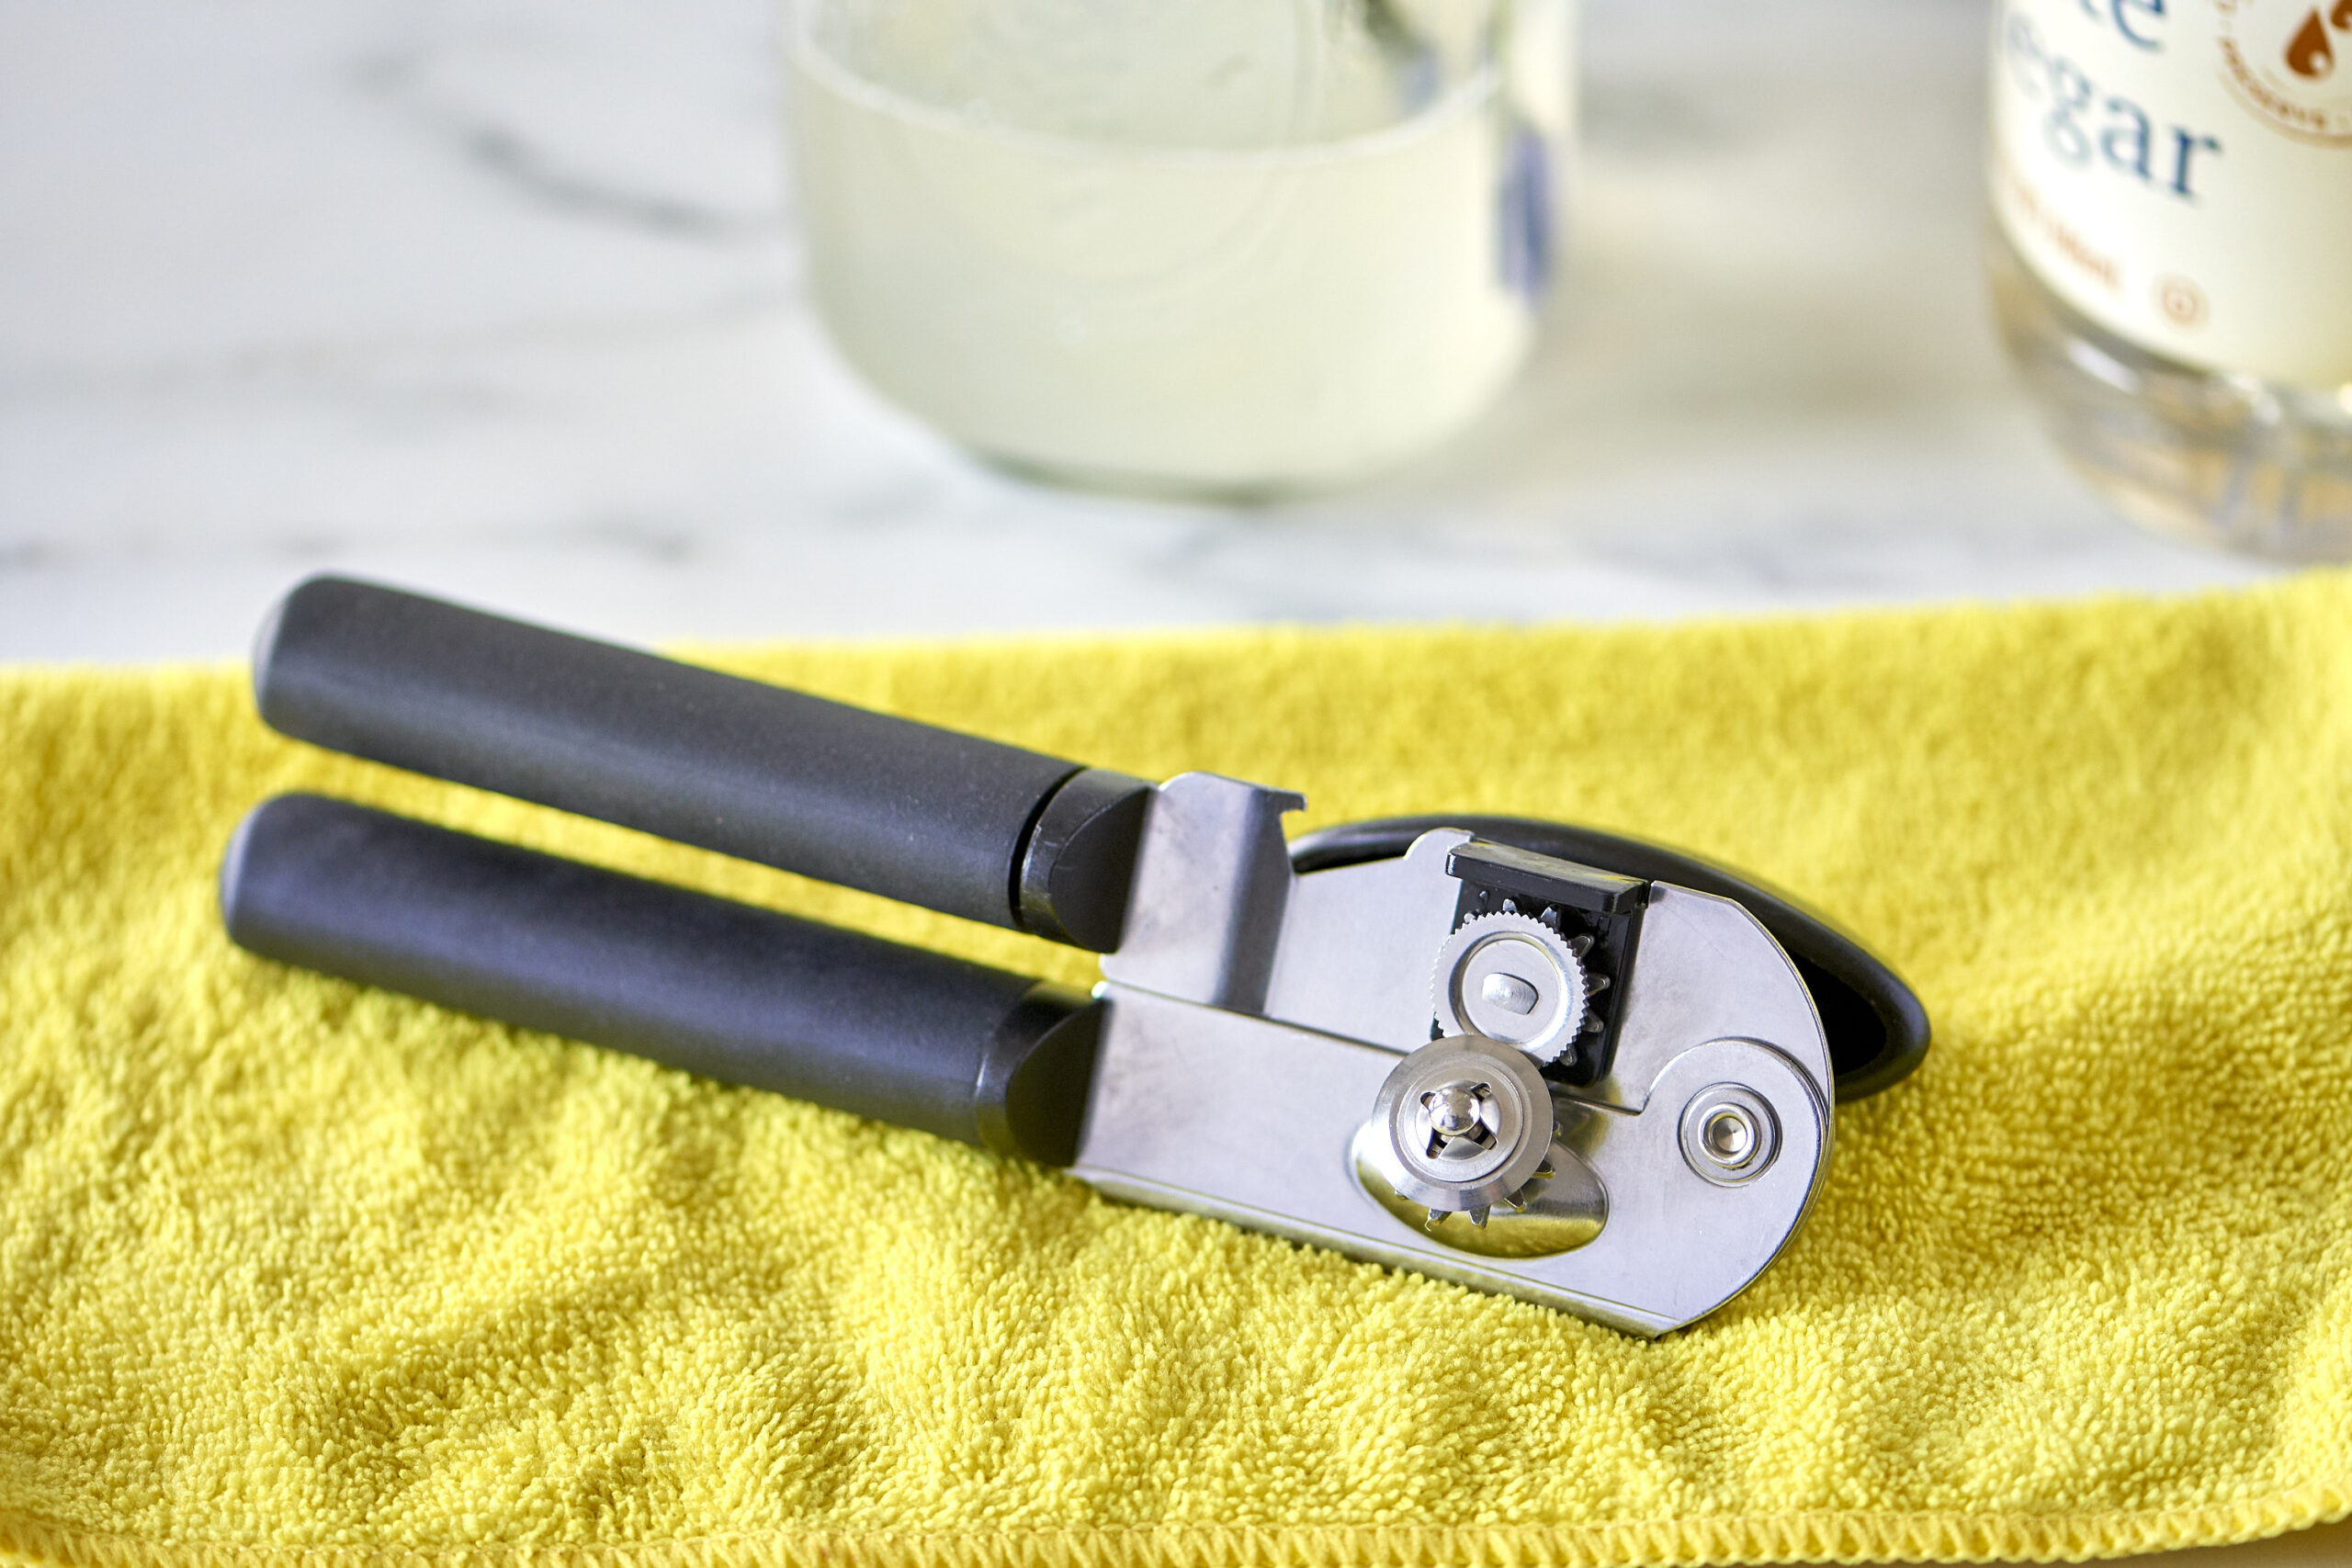 Safe food handling during proper cleaning of can openers